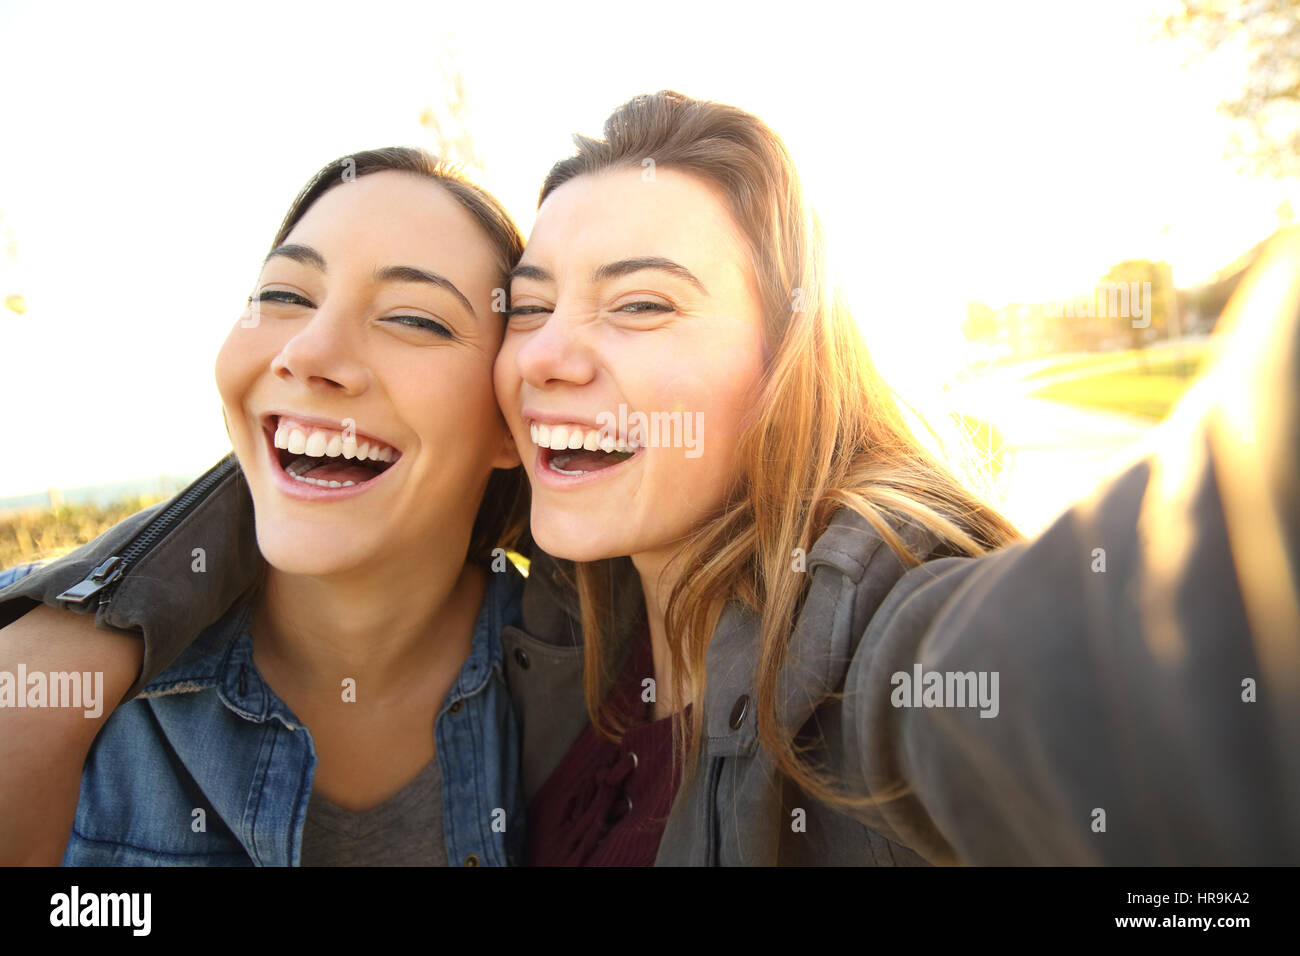 Two funny friends taking selfies outdoors in the street at sunset with a warm light in the background Stock Photo